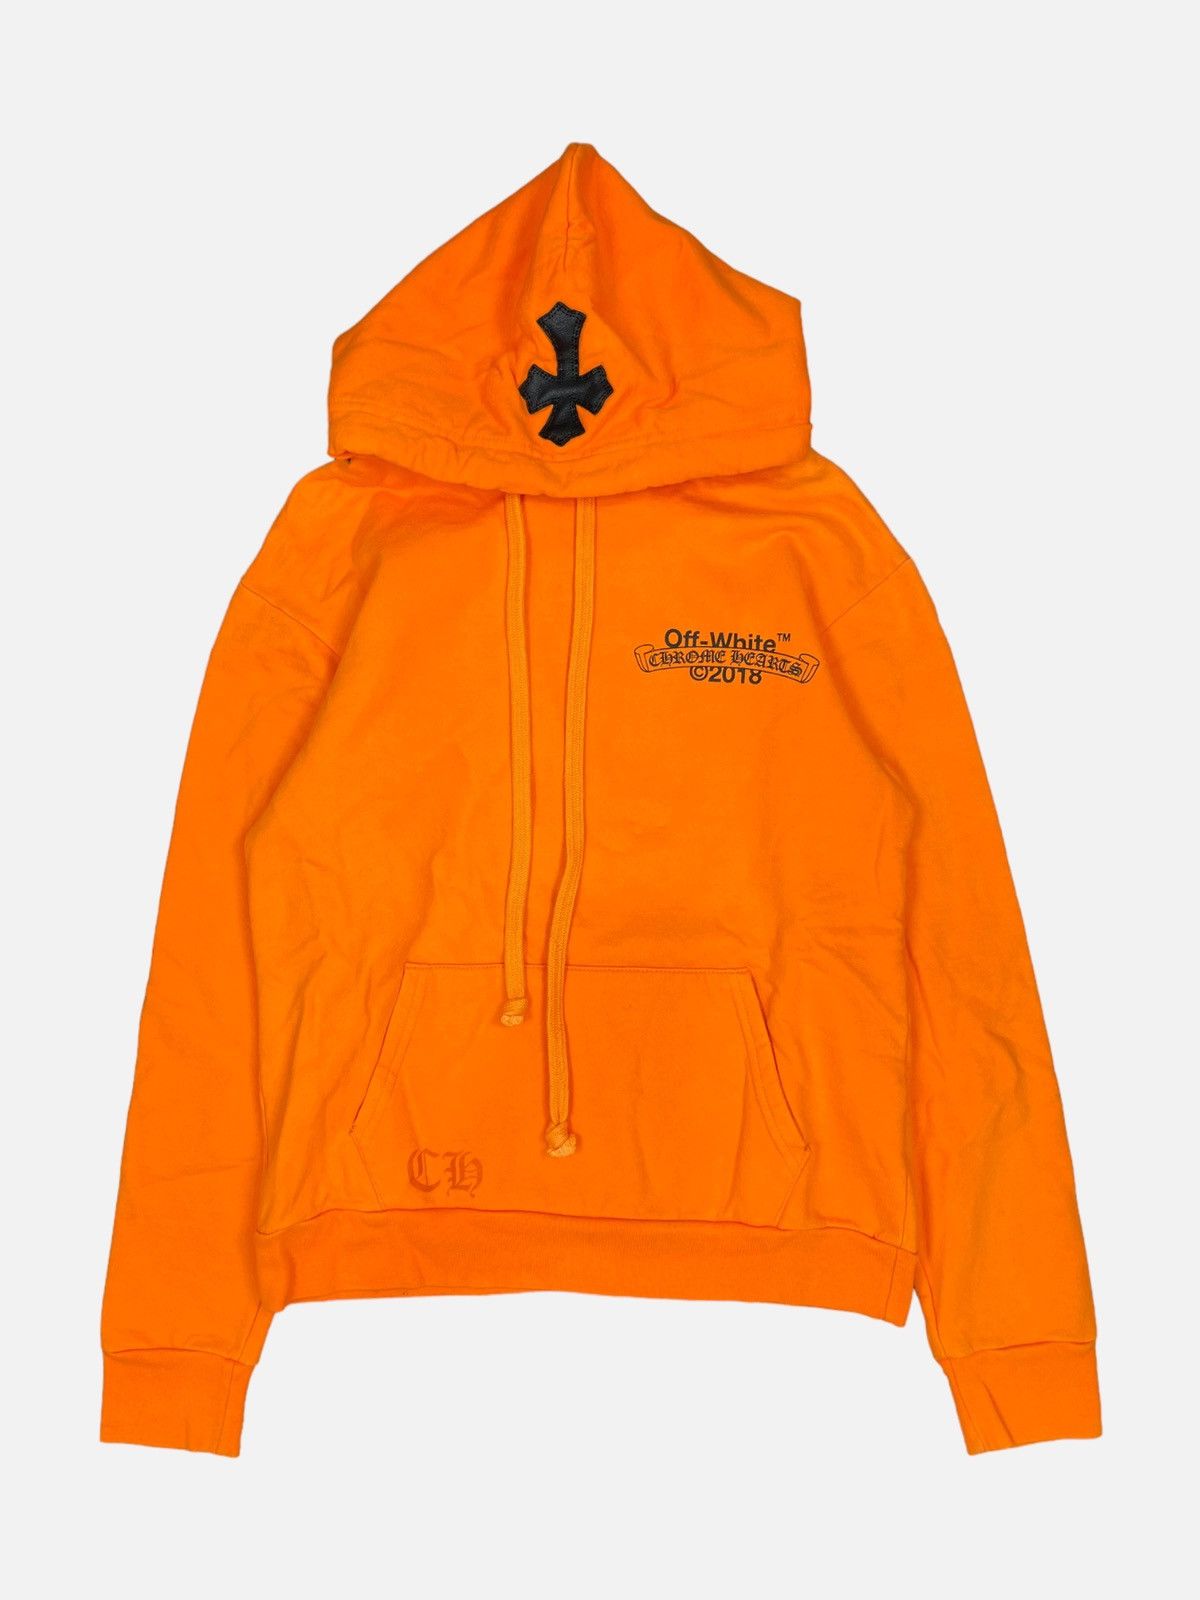 Off-White Chrome Hearts Off-White Cross Patch Hoodie | Grailed